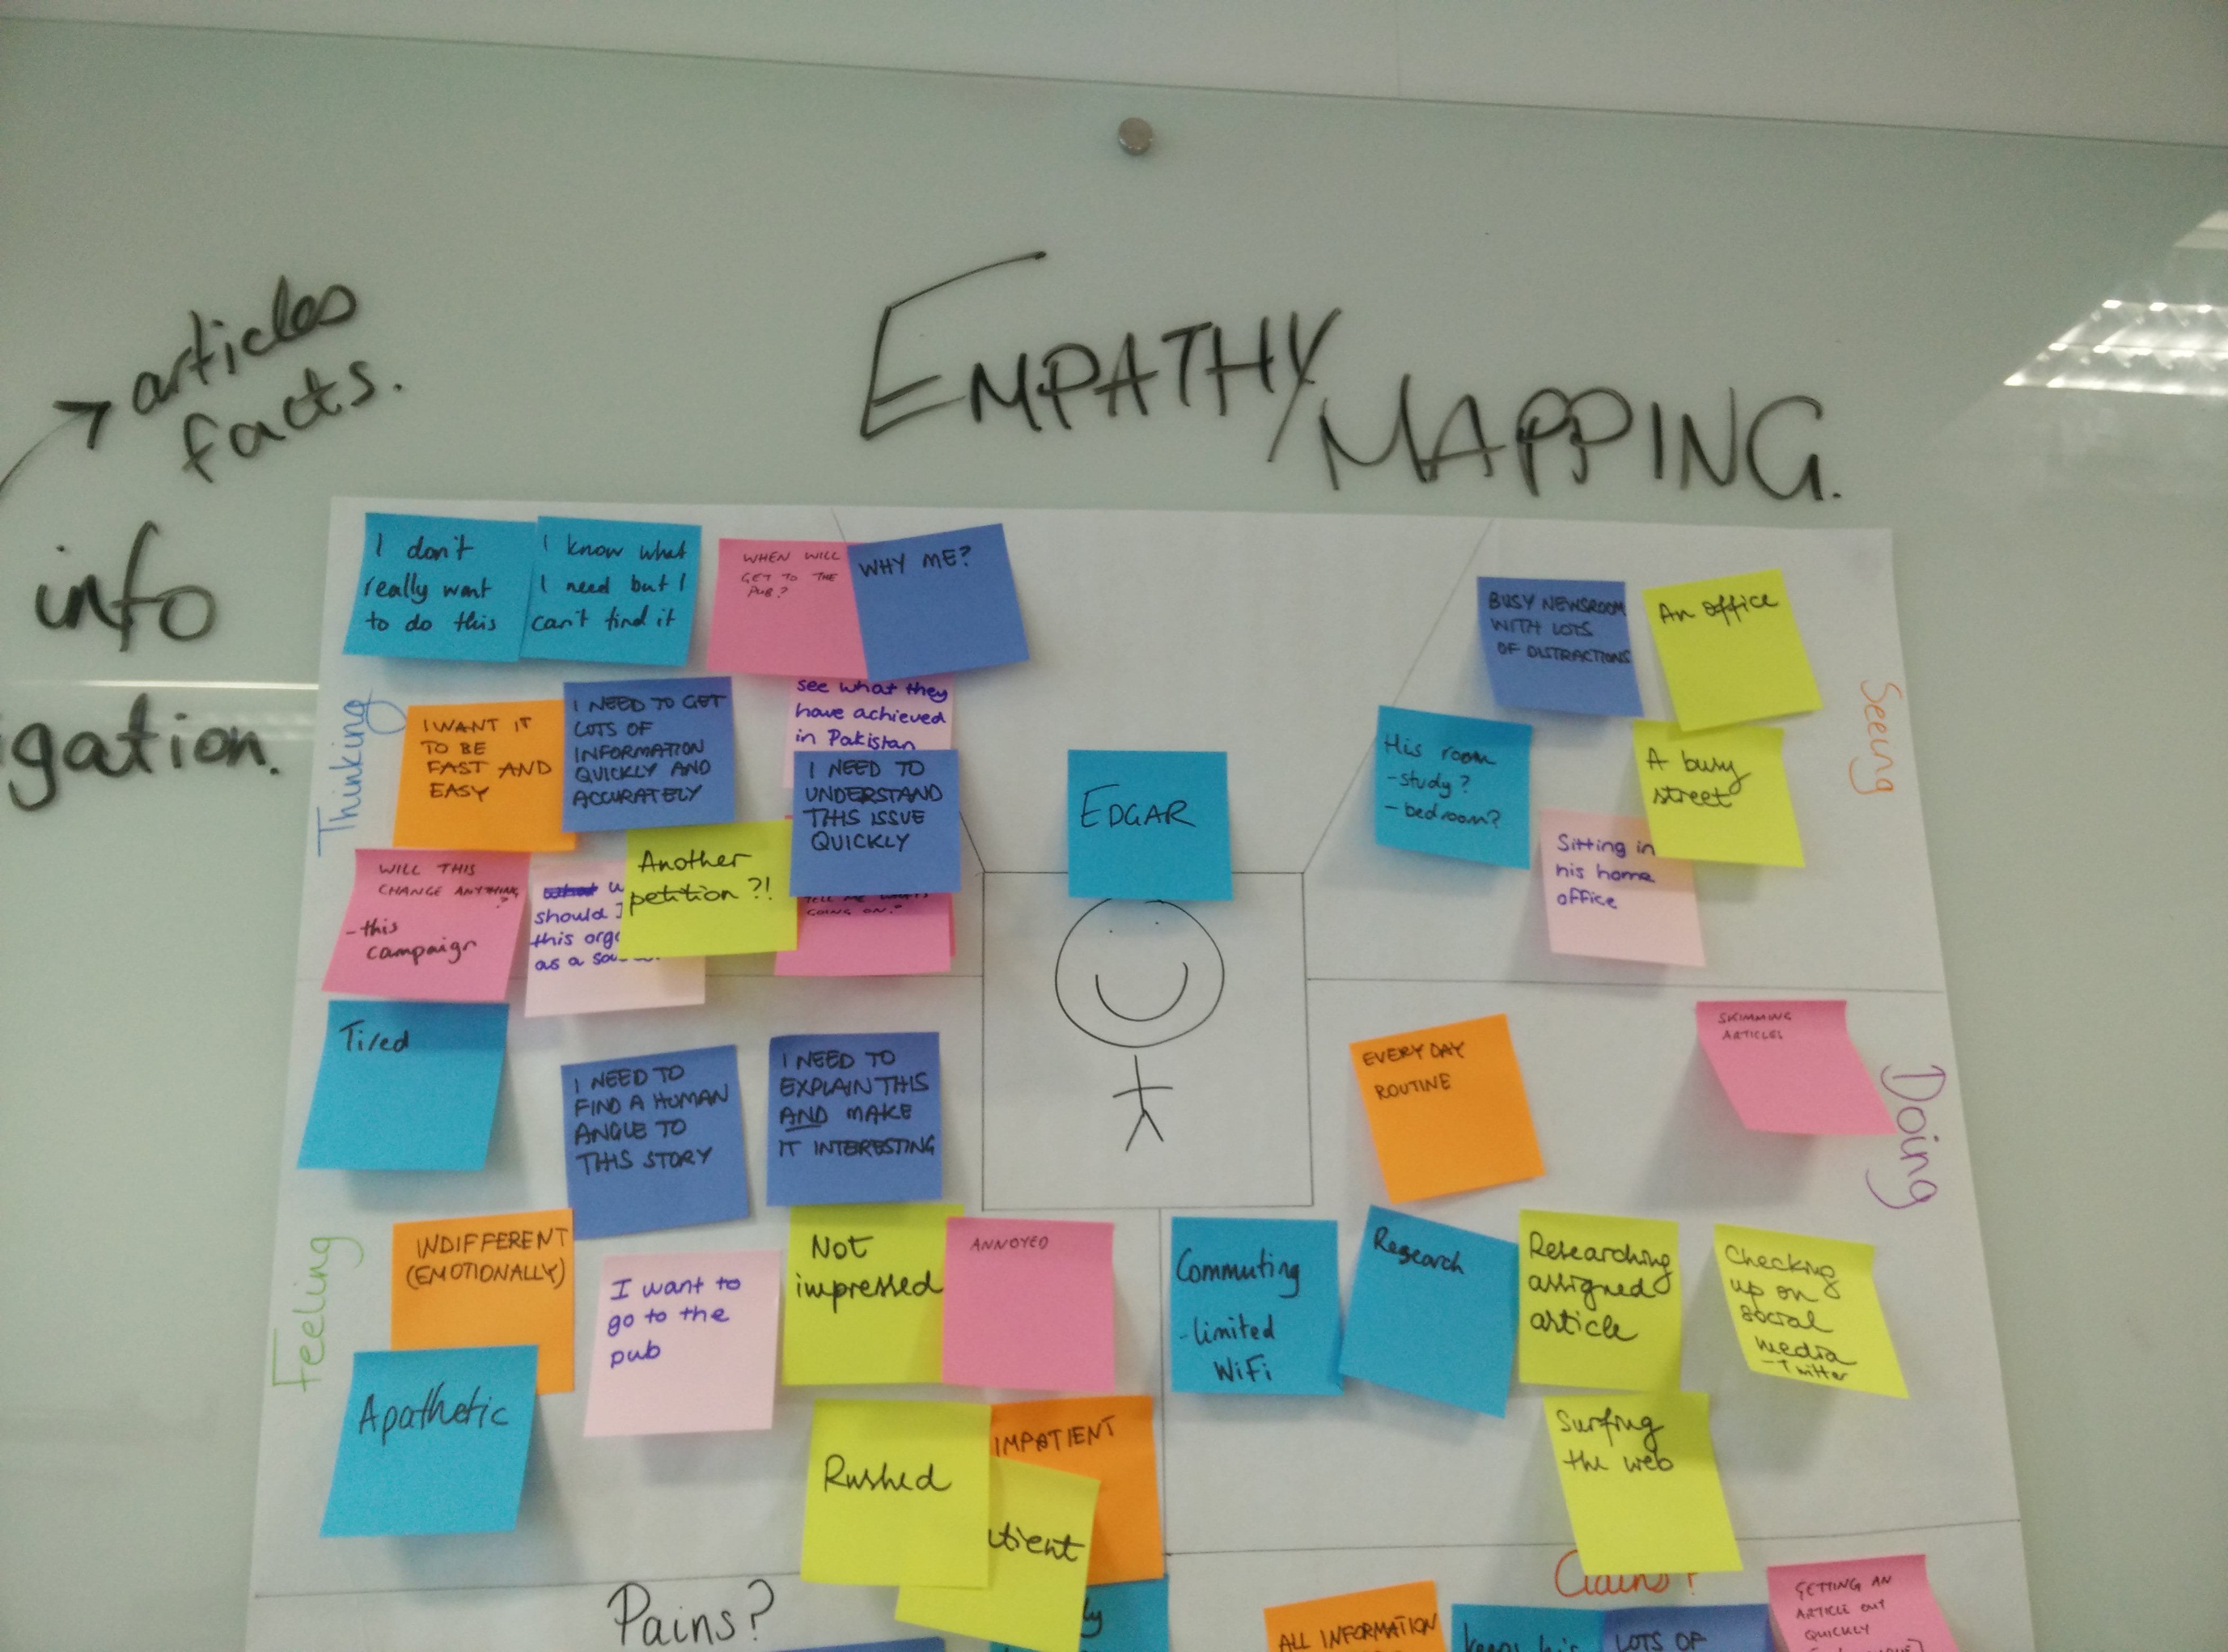 Top half of the empathy mapping, with sticky notes and a template demonstrating the user's emotions through their experience